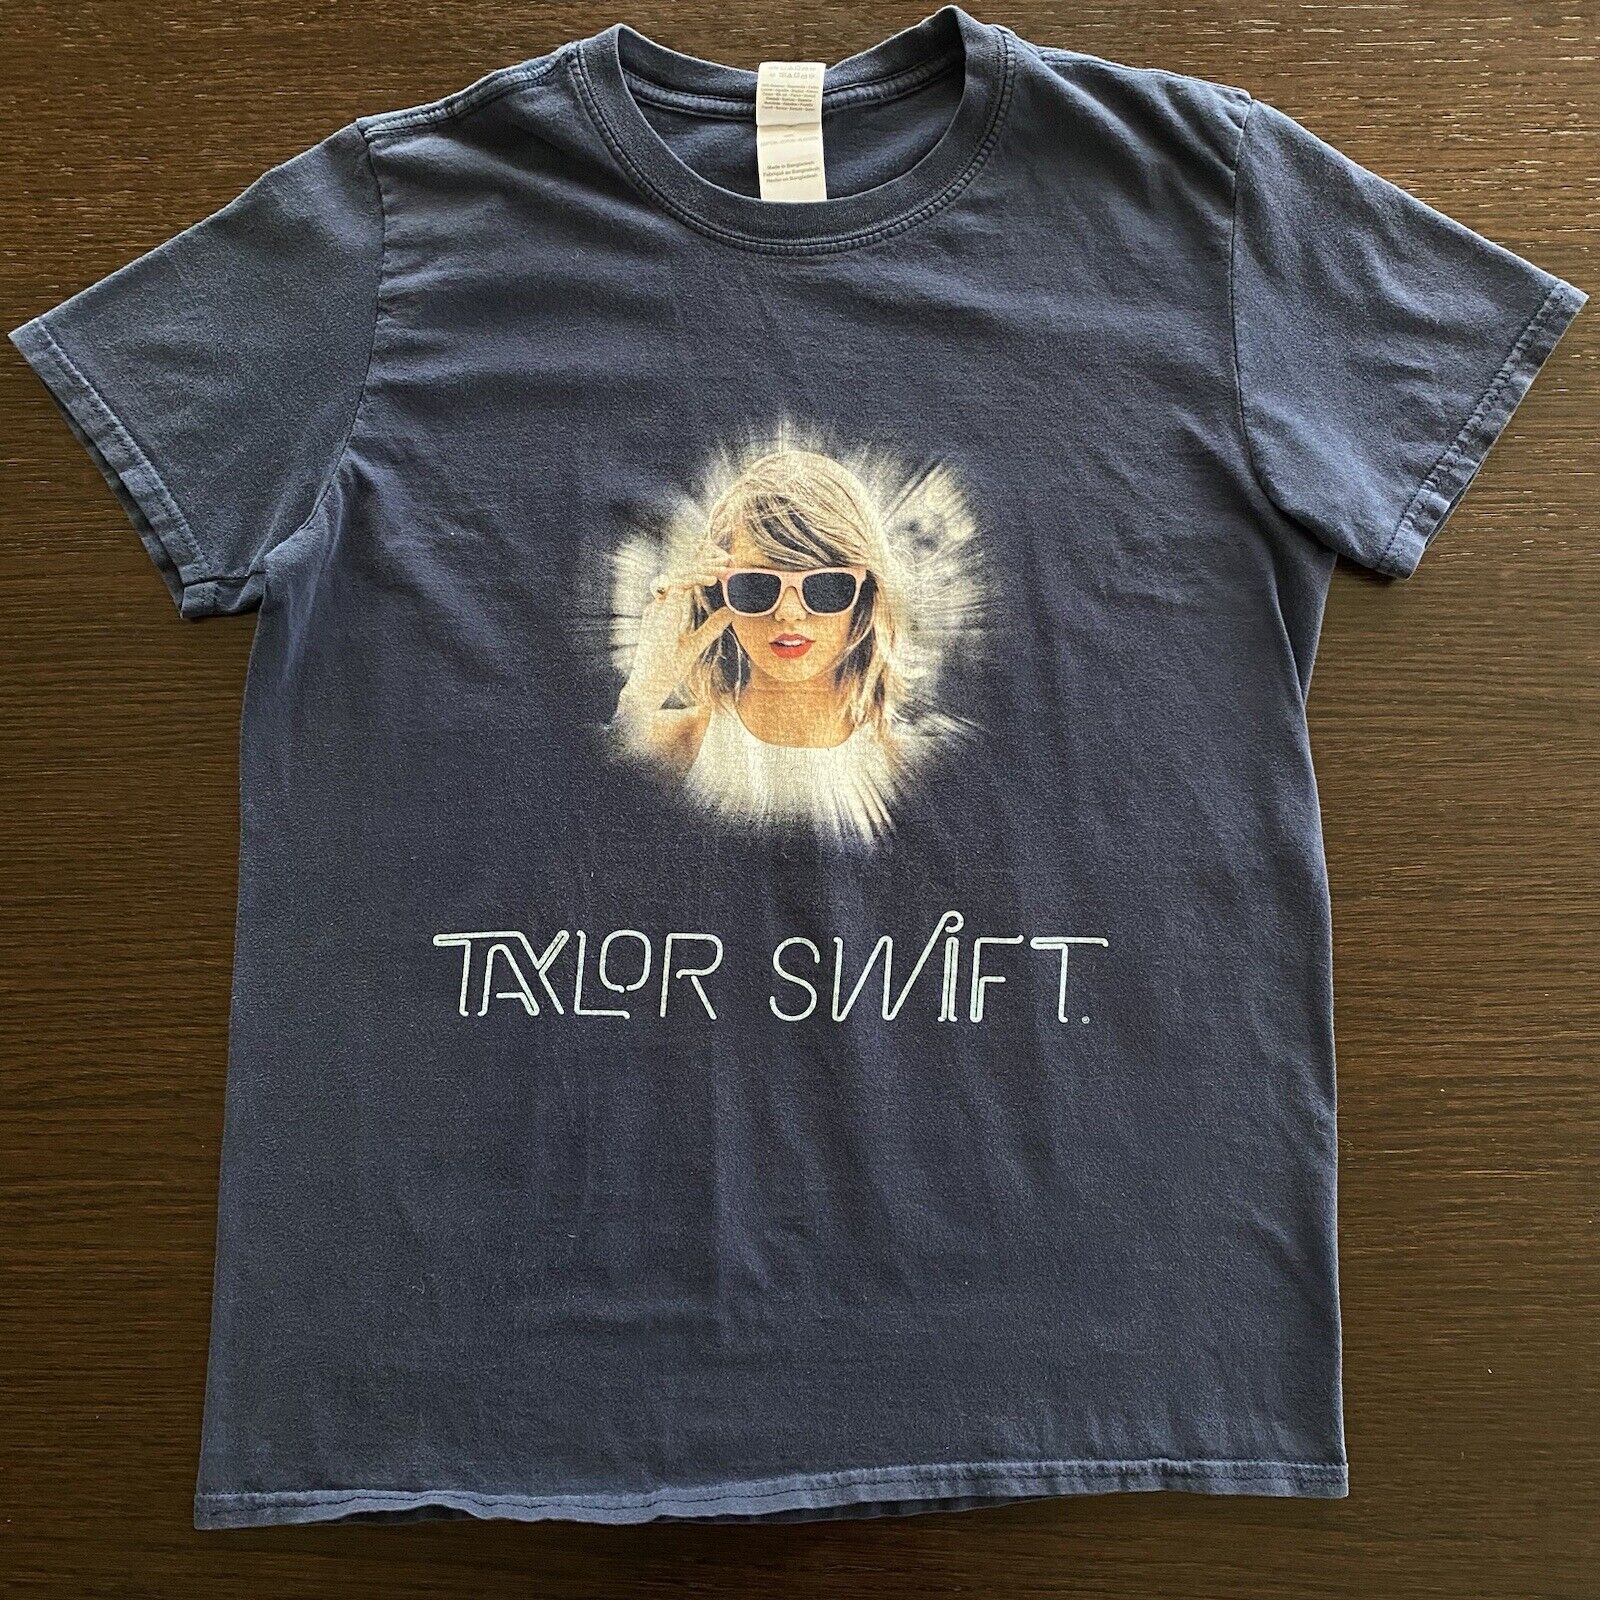 Vintage Taylor Swift 1989 Tour T Shirt Medium Rare Double Sided Dates Official